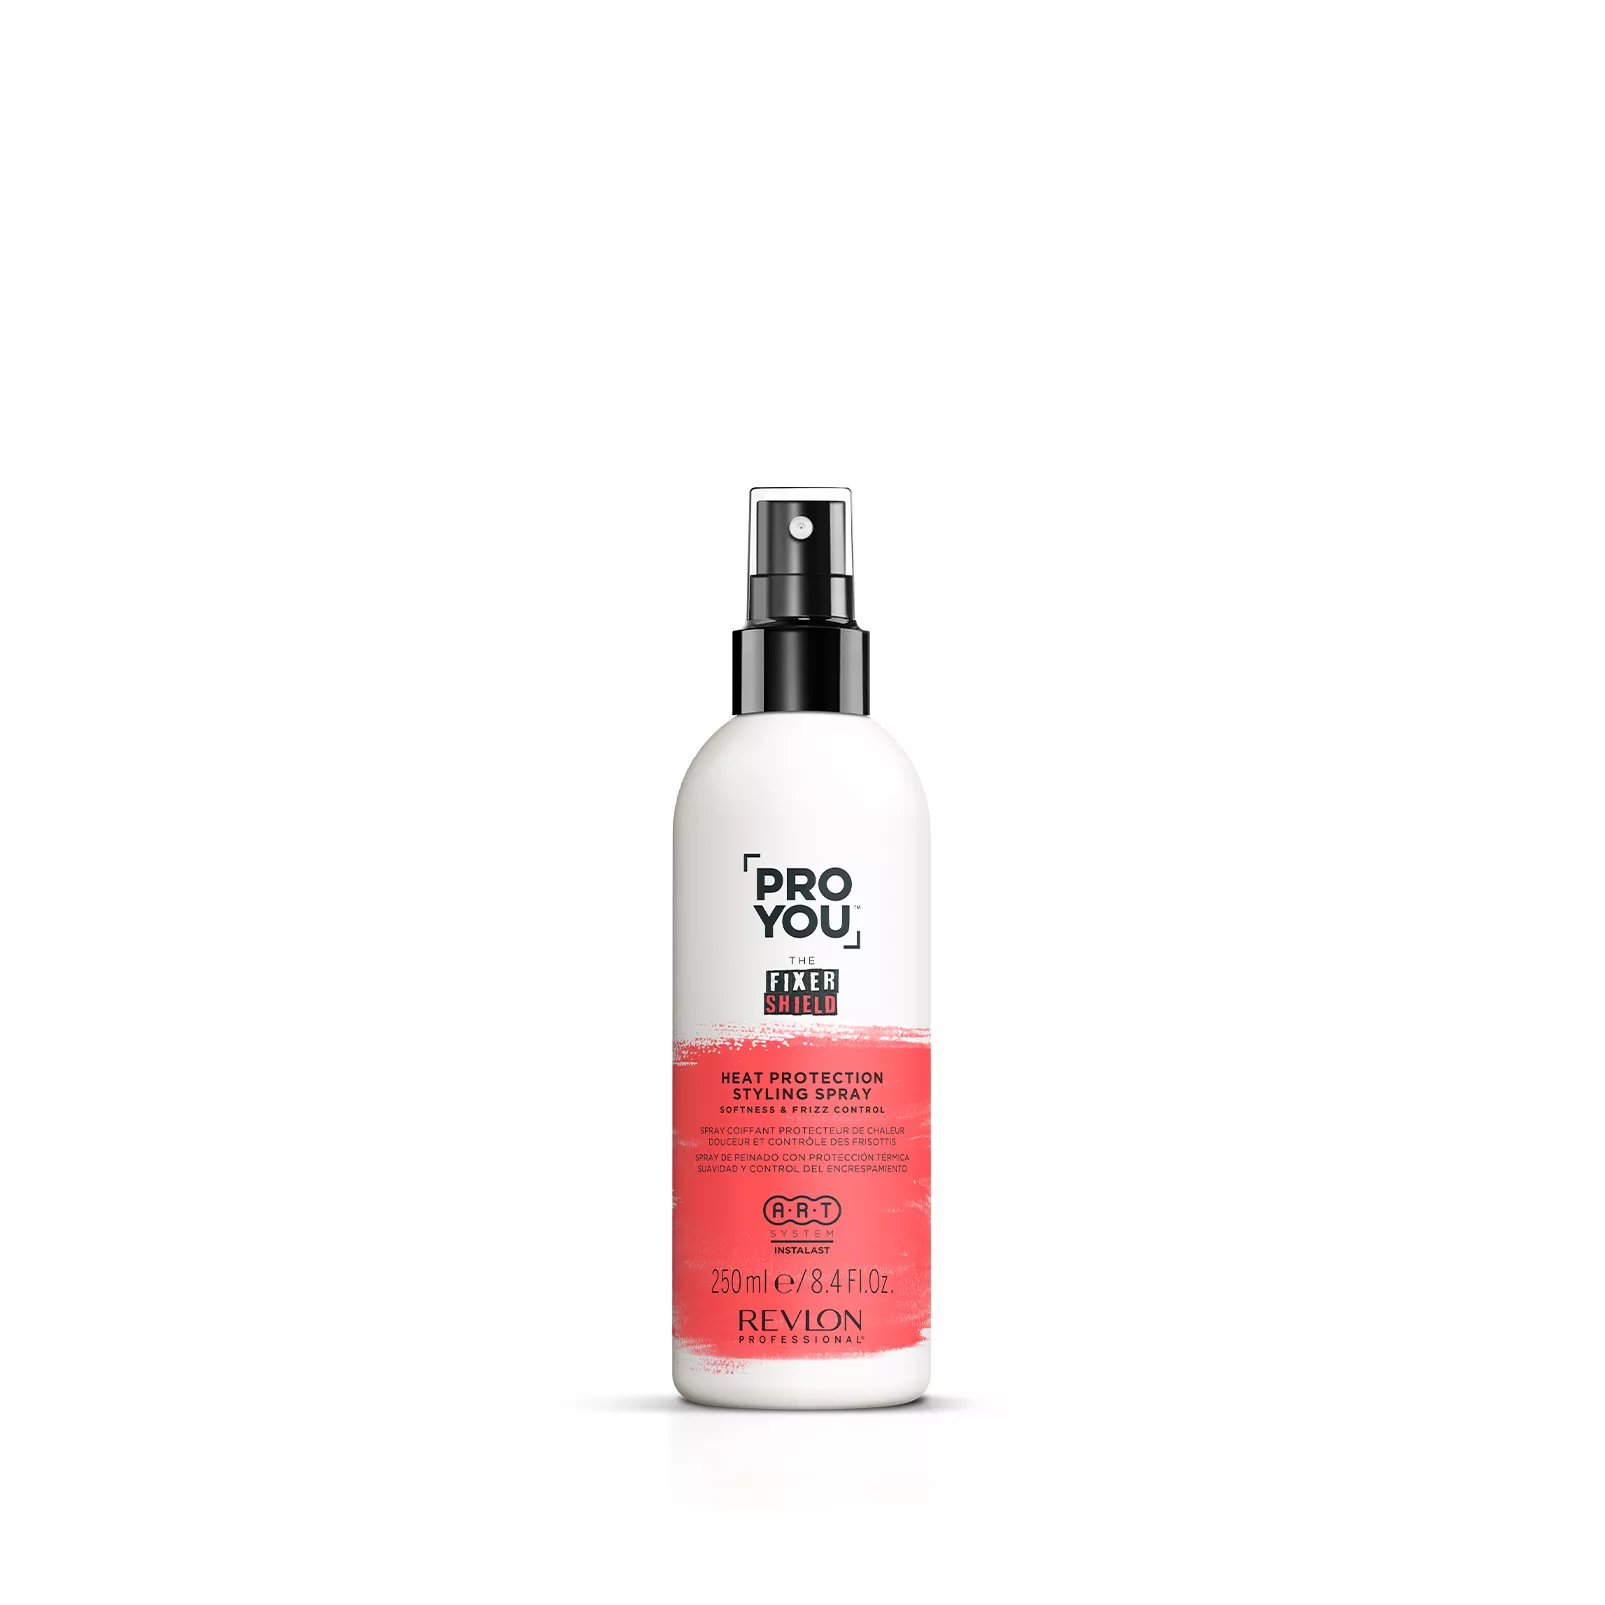 Pro You™ The Fixer Professional Heat Spray - Revlon Shield Protection Styling 